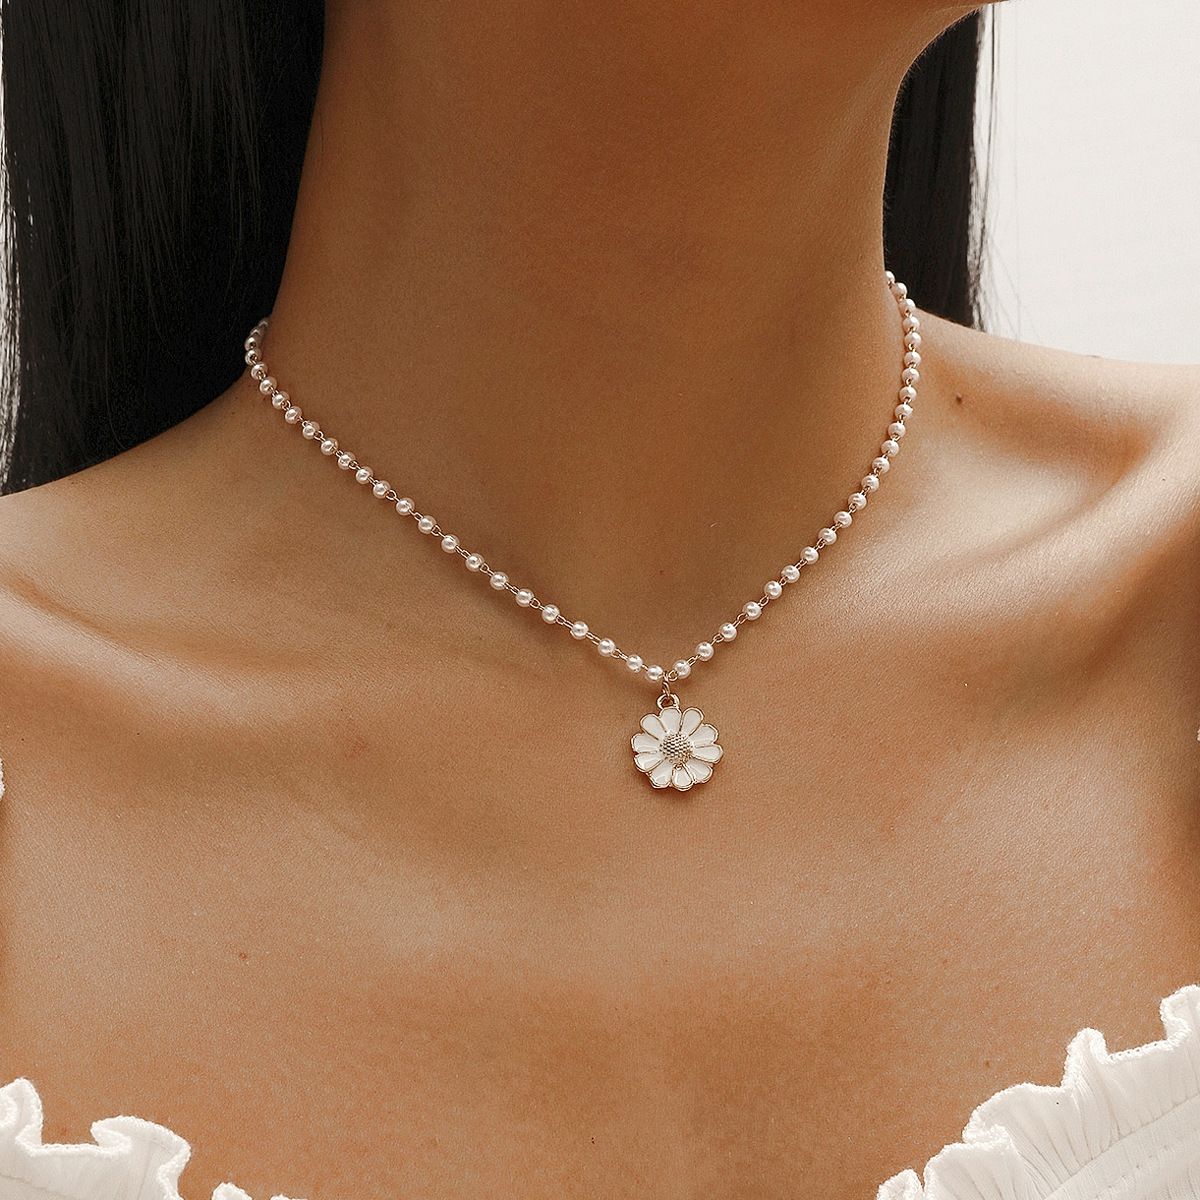 White Flower Pearl Necklace Cool Wind High Flash Pearl Chain Choker Chrysanthemum Clavicle Chain